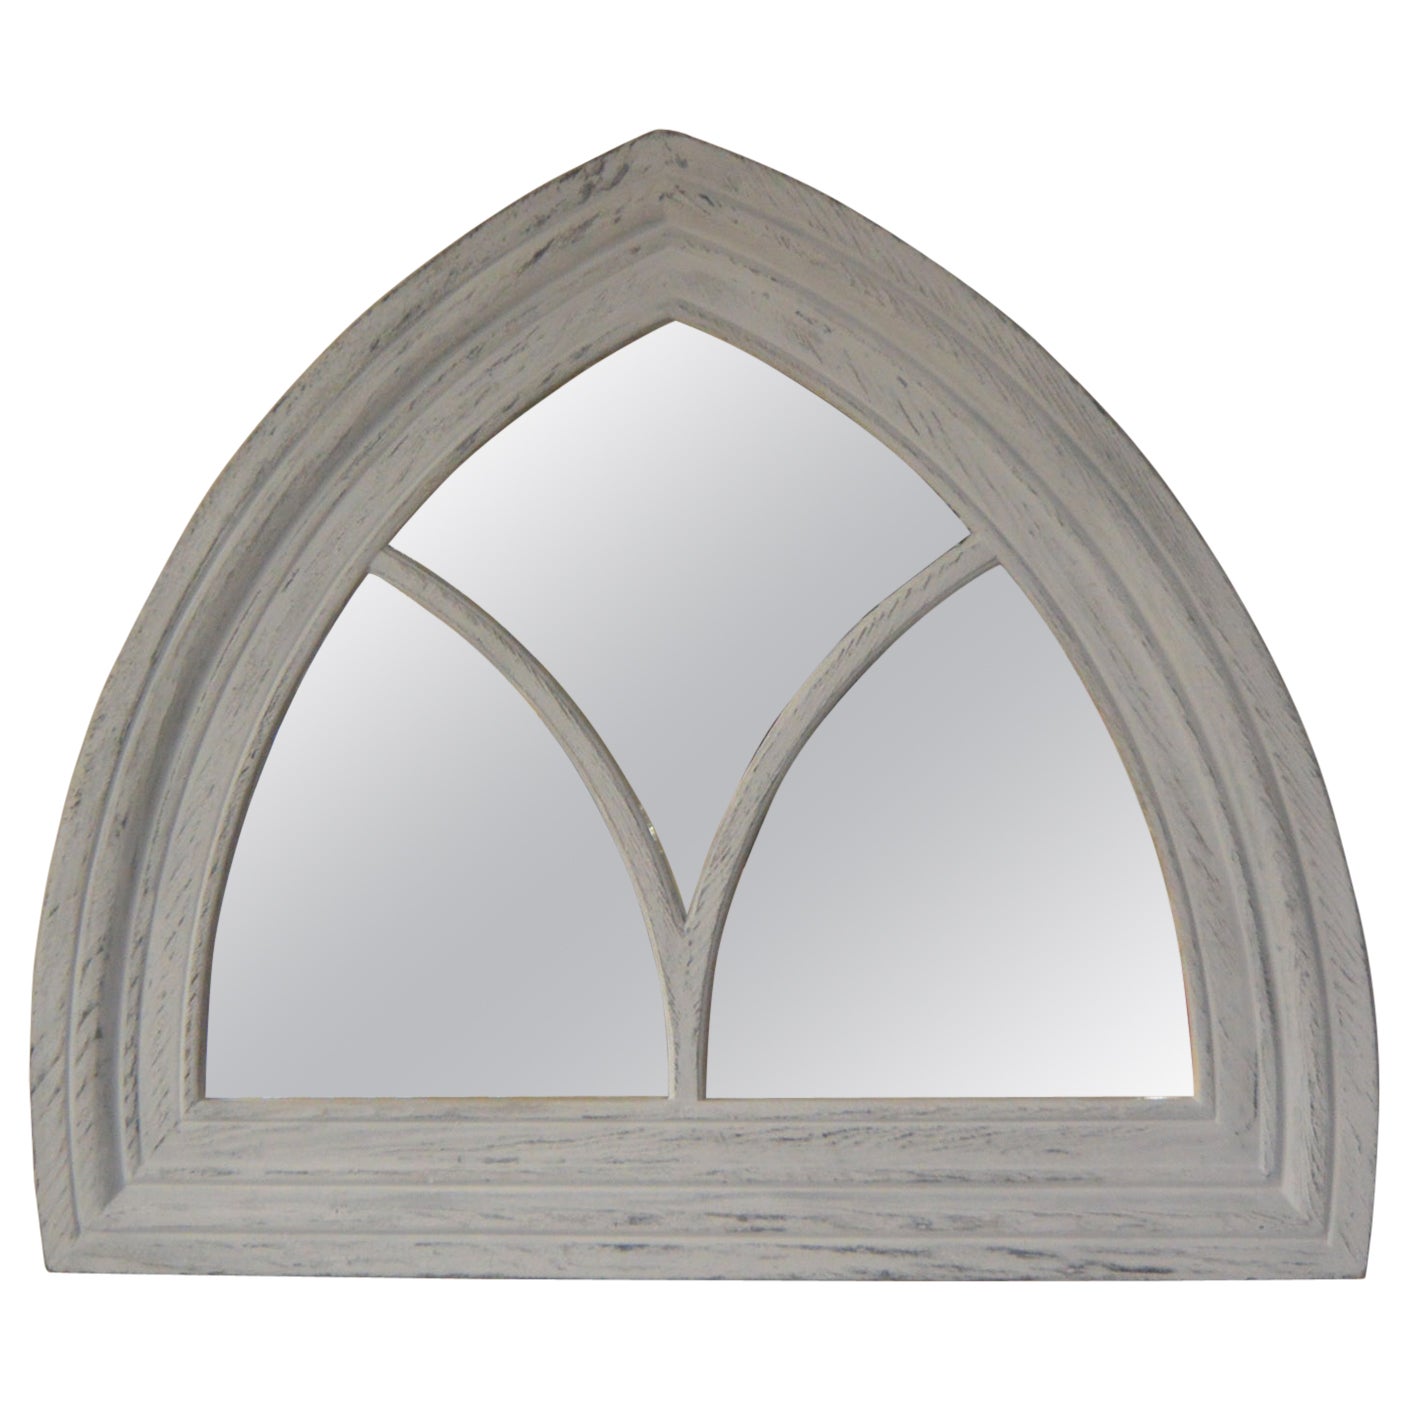 American Mid 19th Century Gothic Revival  Peaked Window Frame Now with Mirrors For Sale